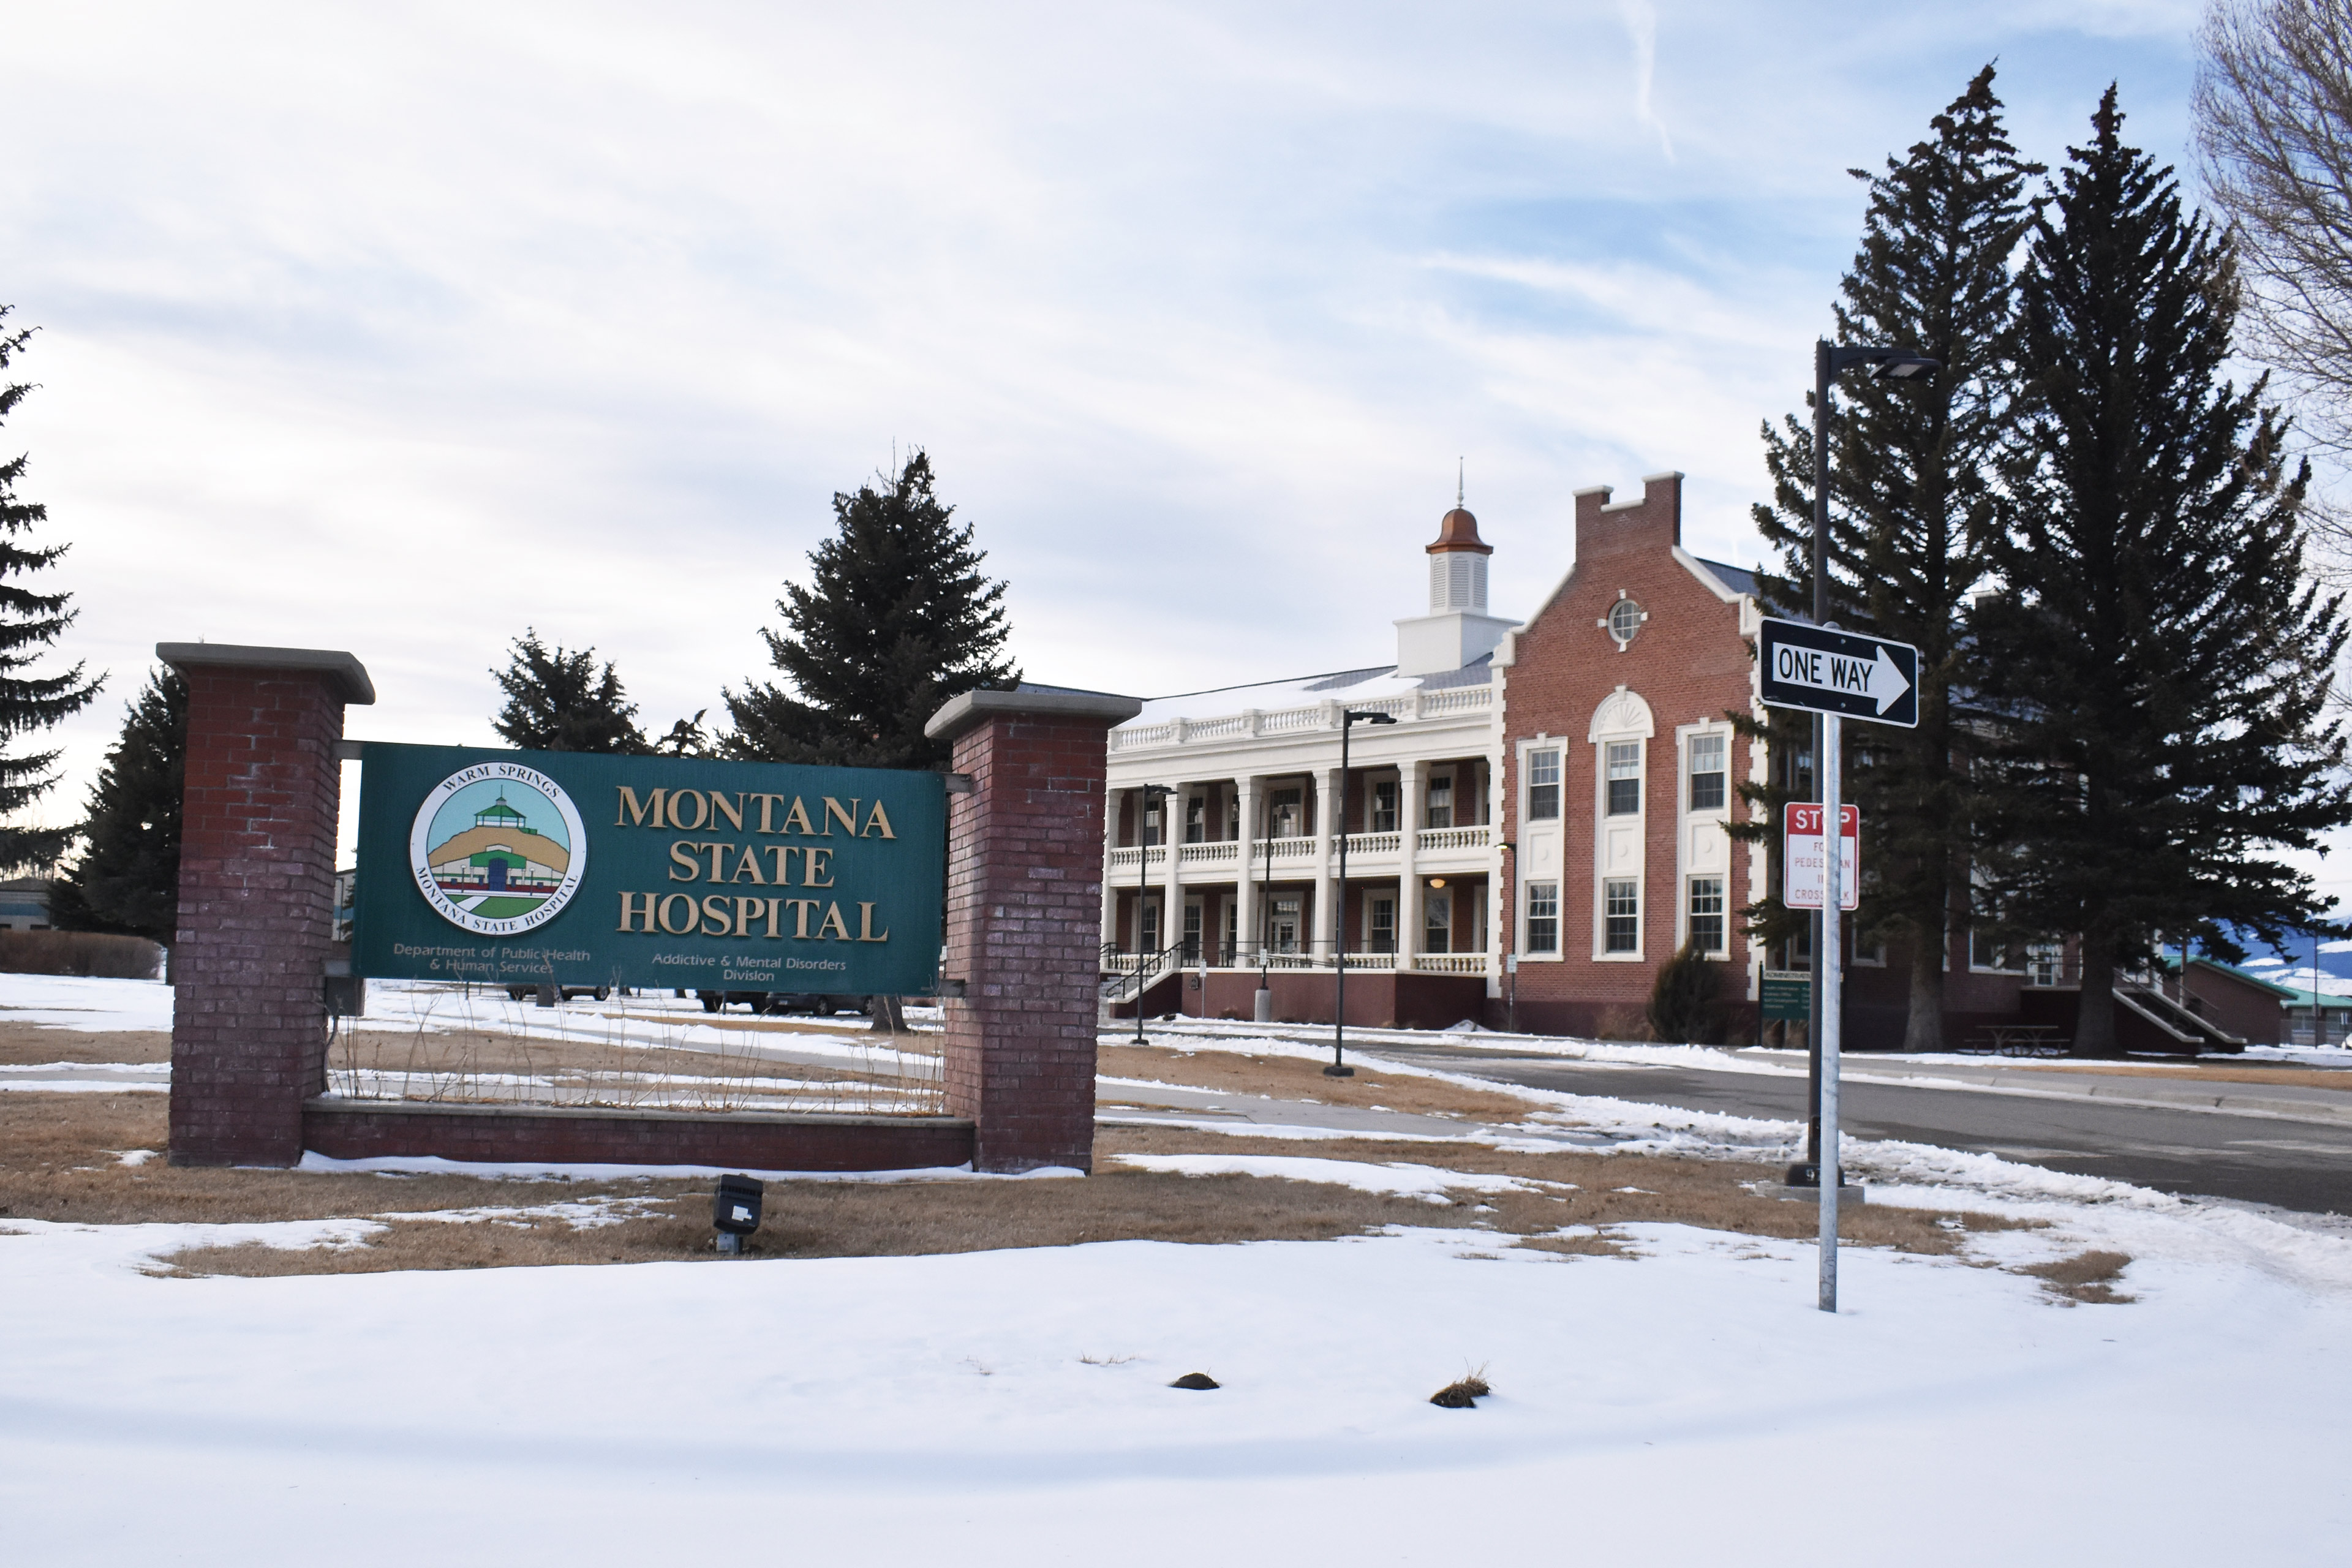 A photo shows a hospital building with a sign in front that reads, "Montana State Hospital."